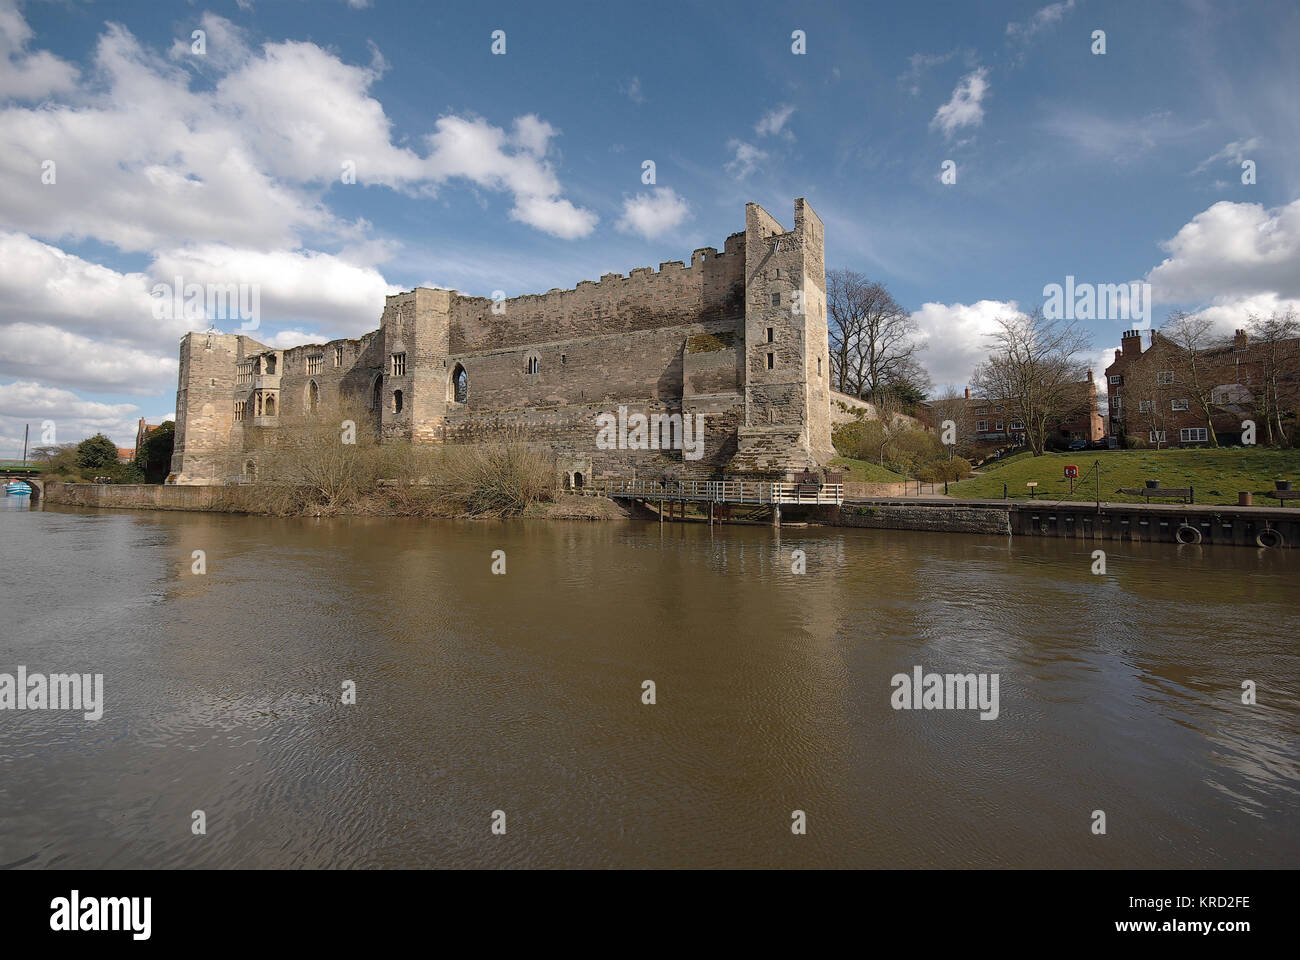 View of Newark Castle, Newark-on-Trent, Nottinghamshire, from across the river.  The building was reconstructed in the early 13th century, and King John of England died there on the night of 18 October 1216. Stock Photo